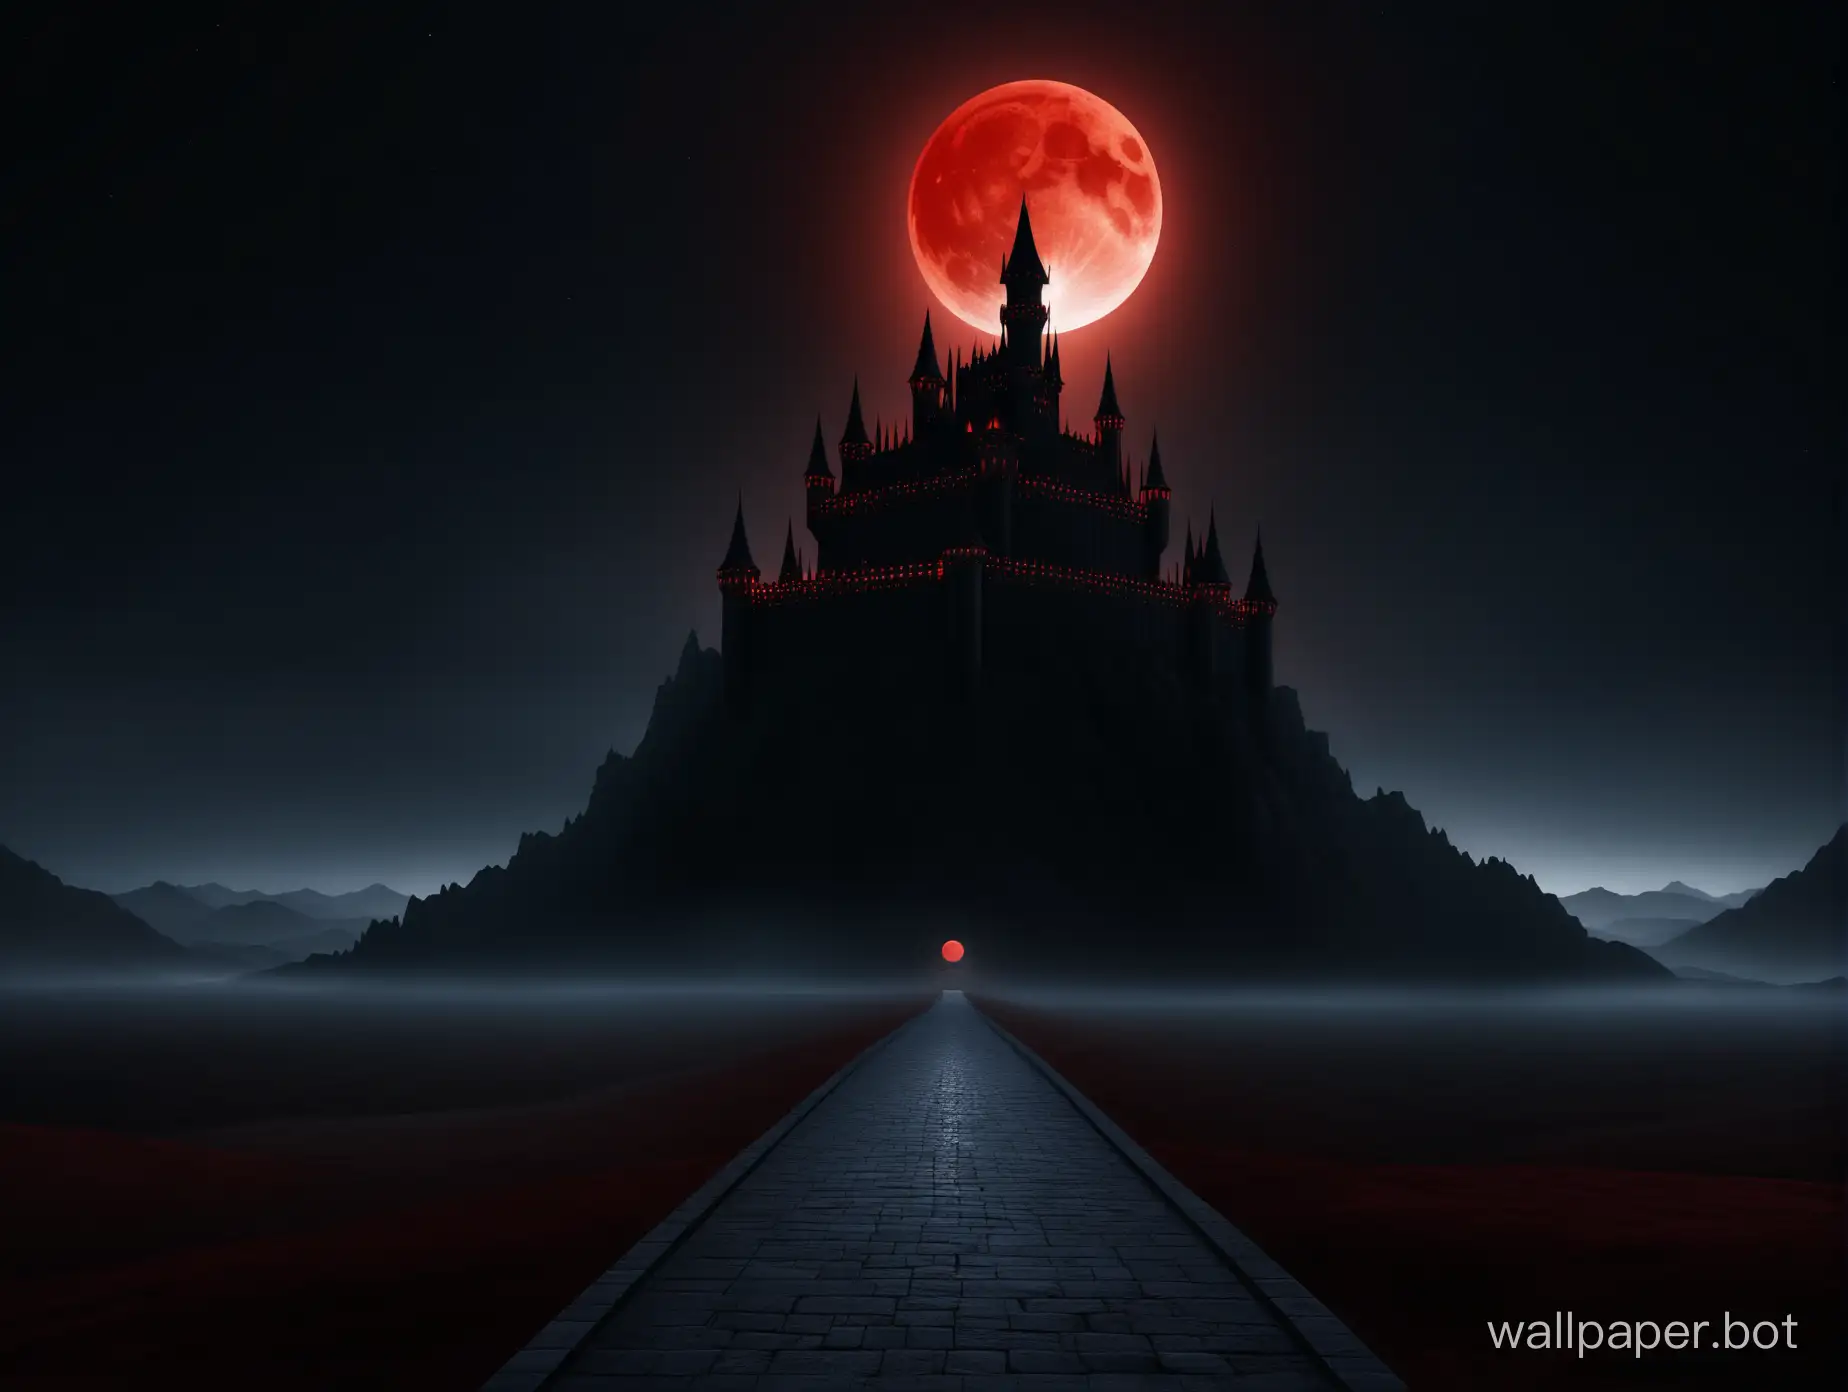 Large epic evil gothic castle, night sky, black desert, blank sky, ((very vertical architecture)), photo-realistic, hyper-realistic wallpaper, 4k, lonely landscape, featureless sky, red moon